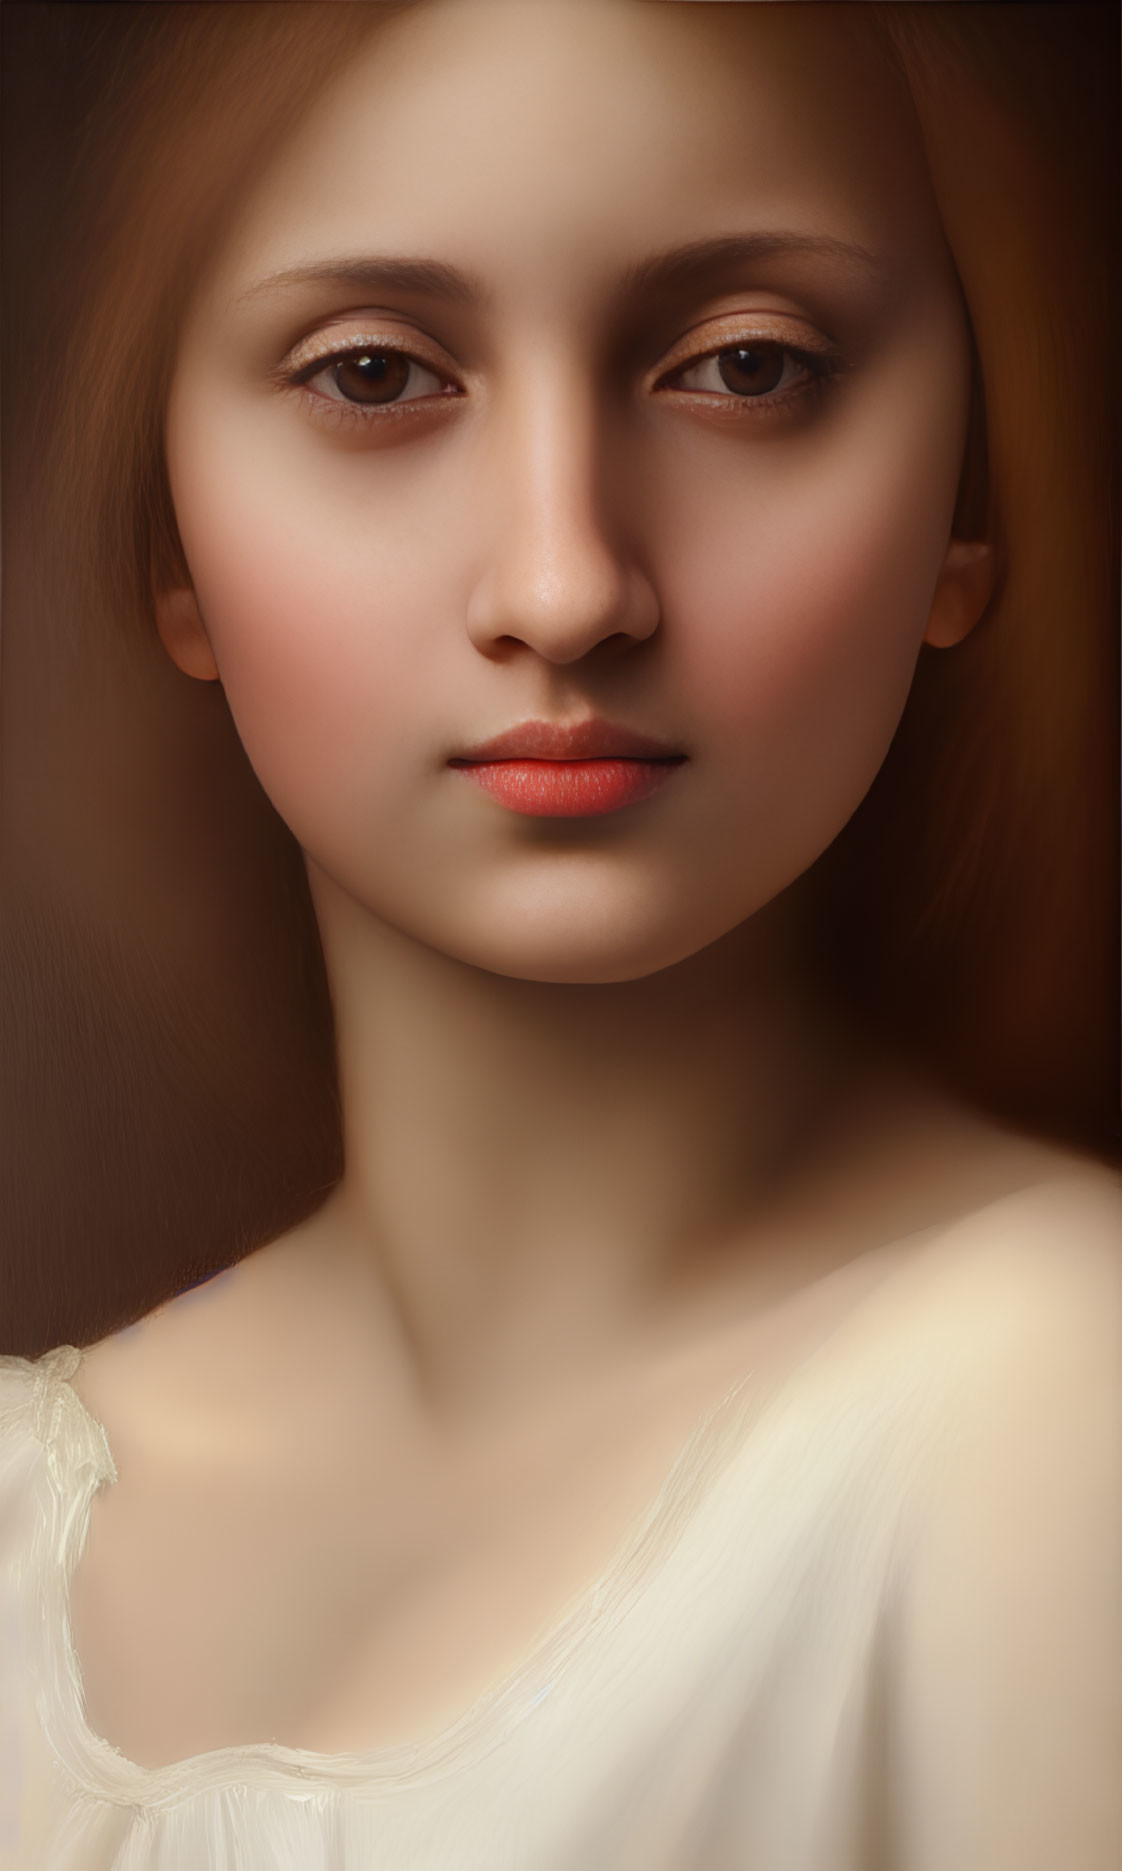 Young woman portrait with soft features and serene expression in off-white garment